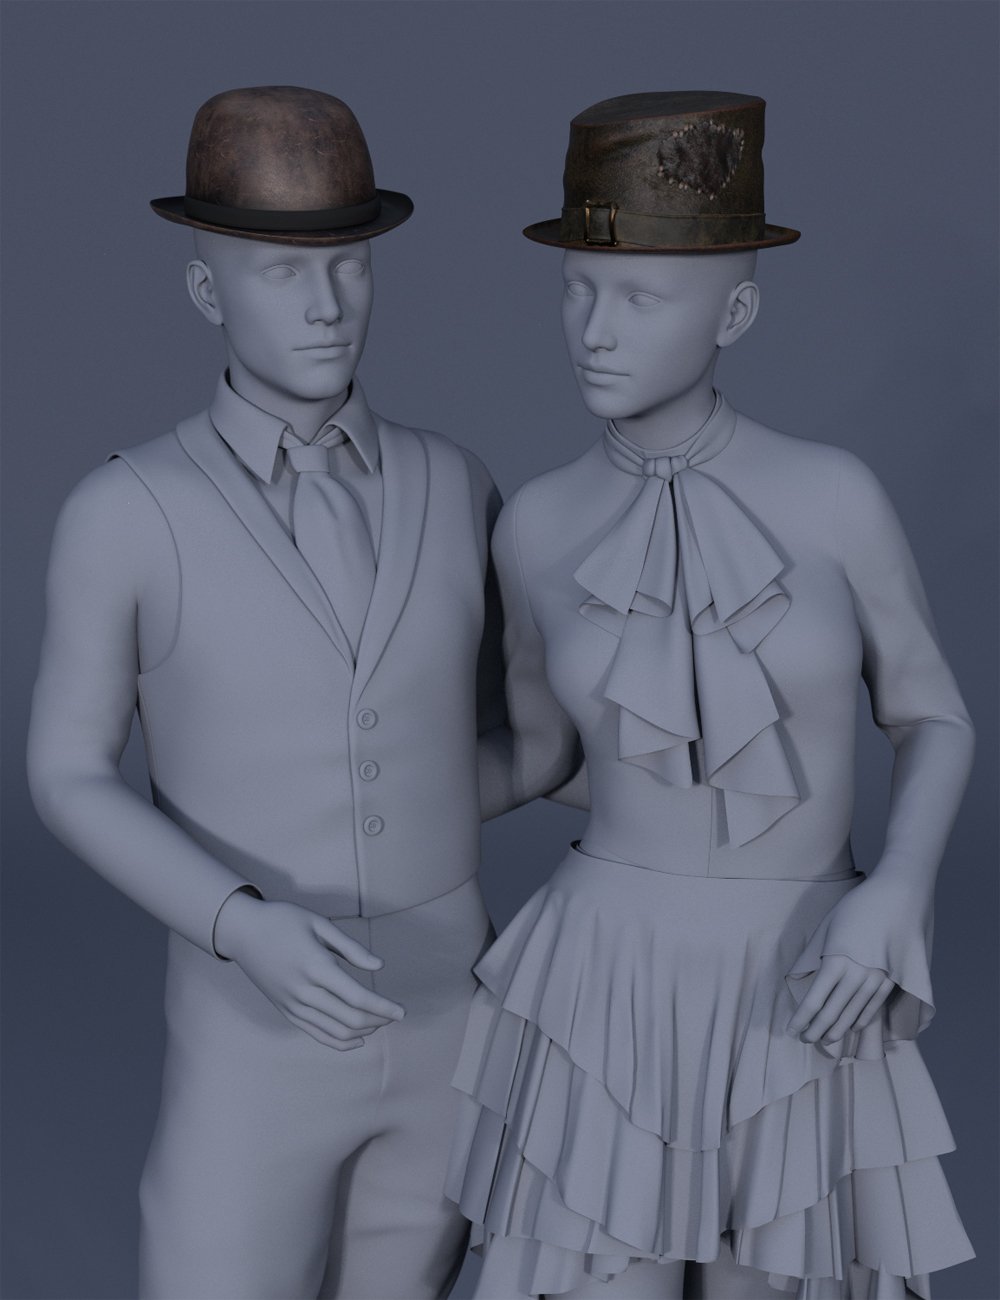 Haberdashery Hats for Genesis 8 and 8.1